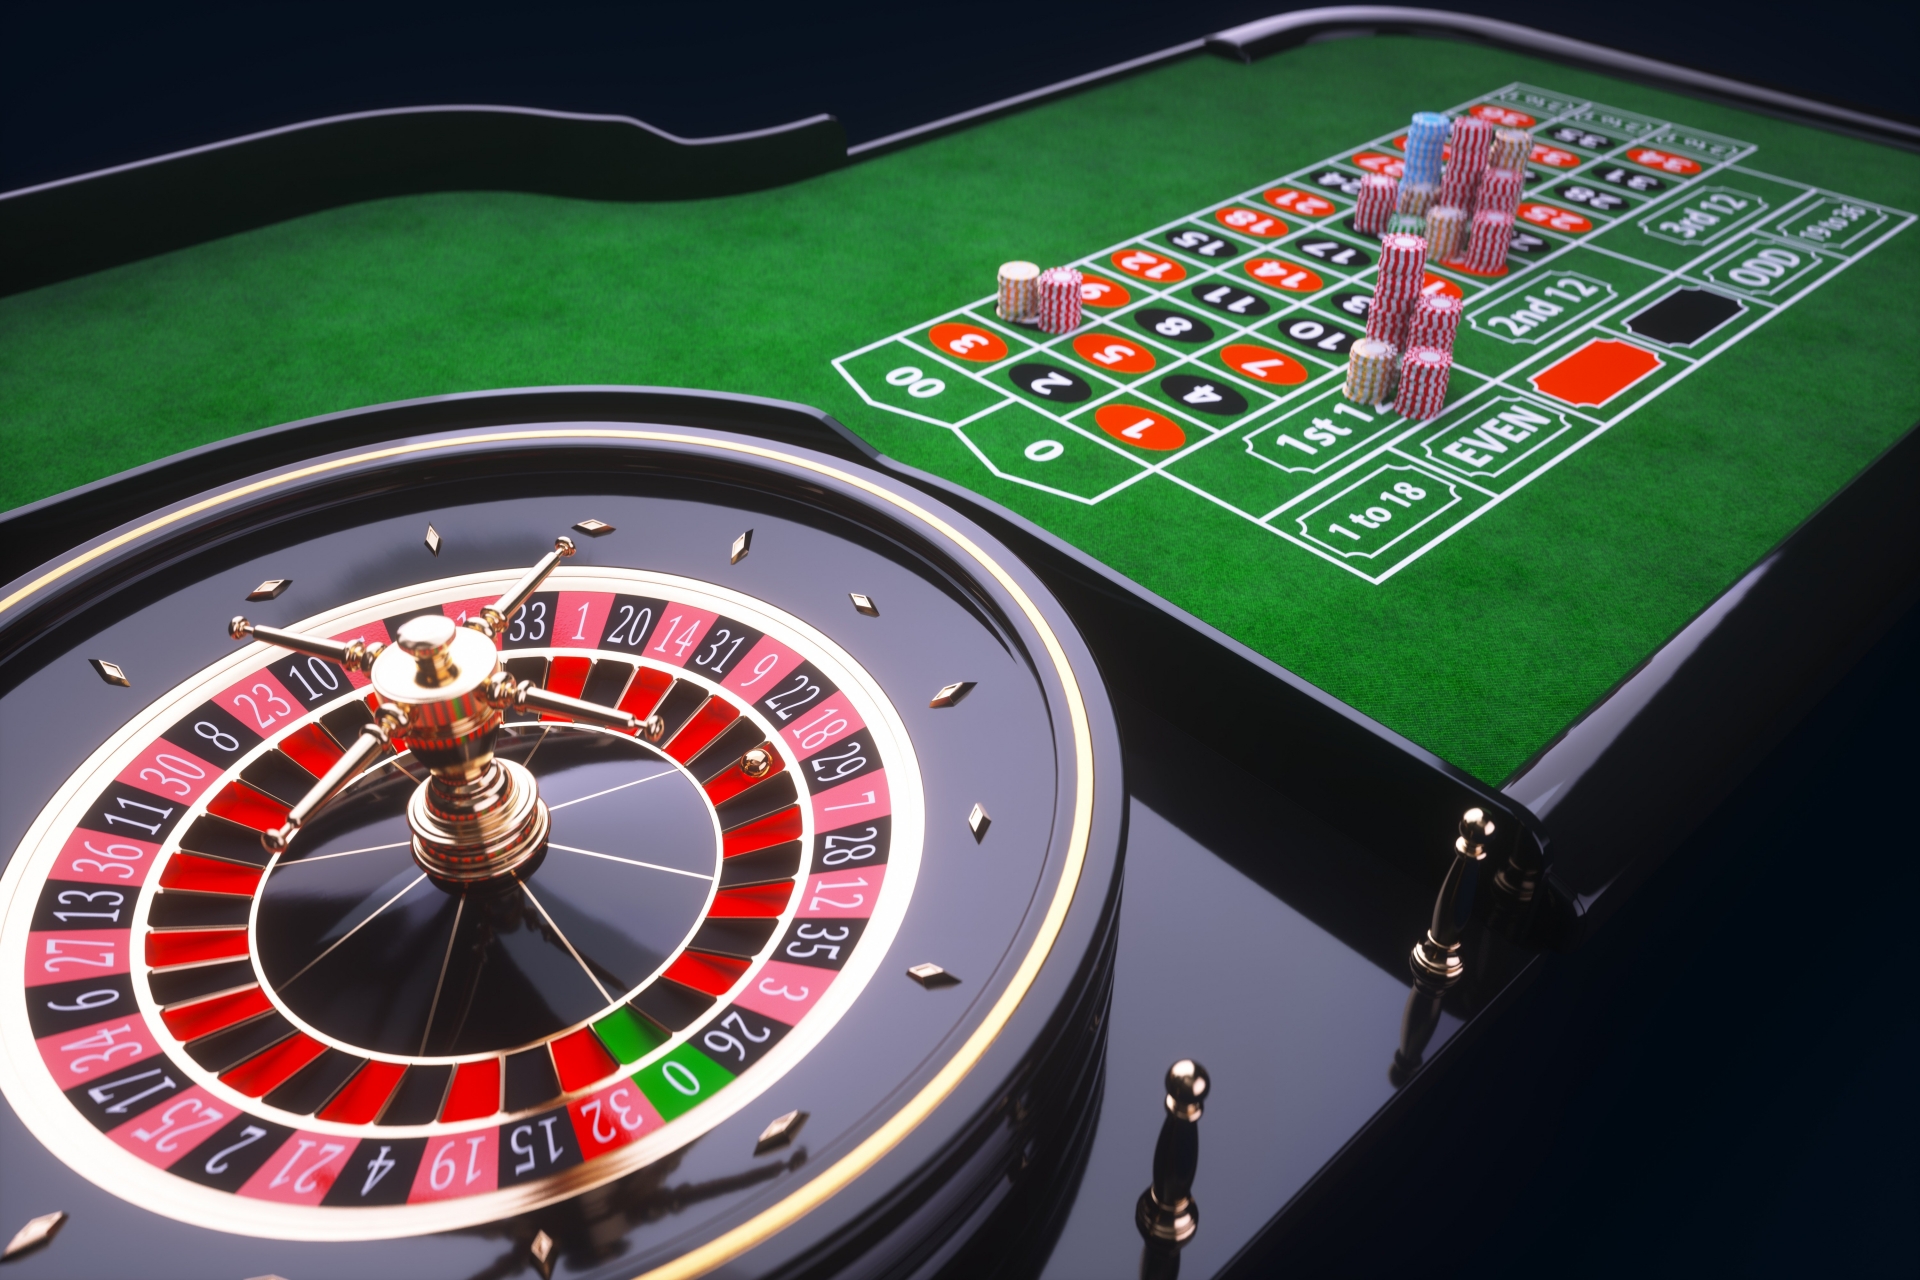 Finding Customers With casino online Part A